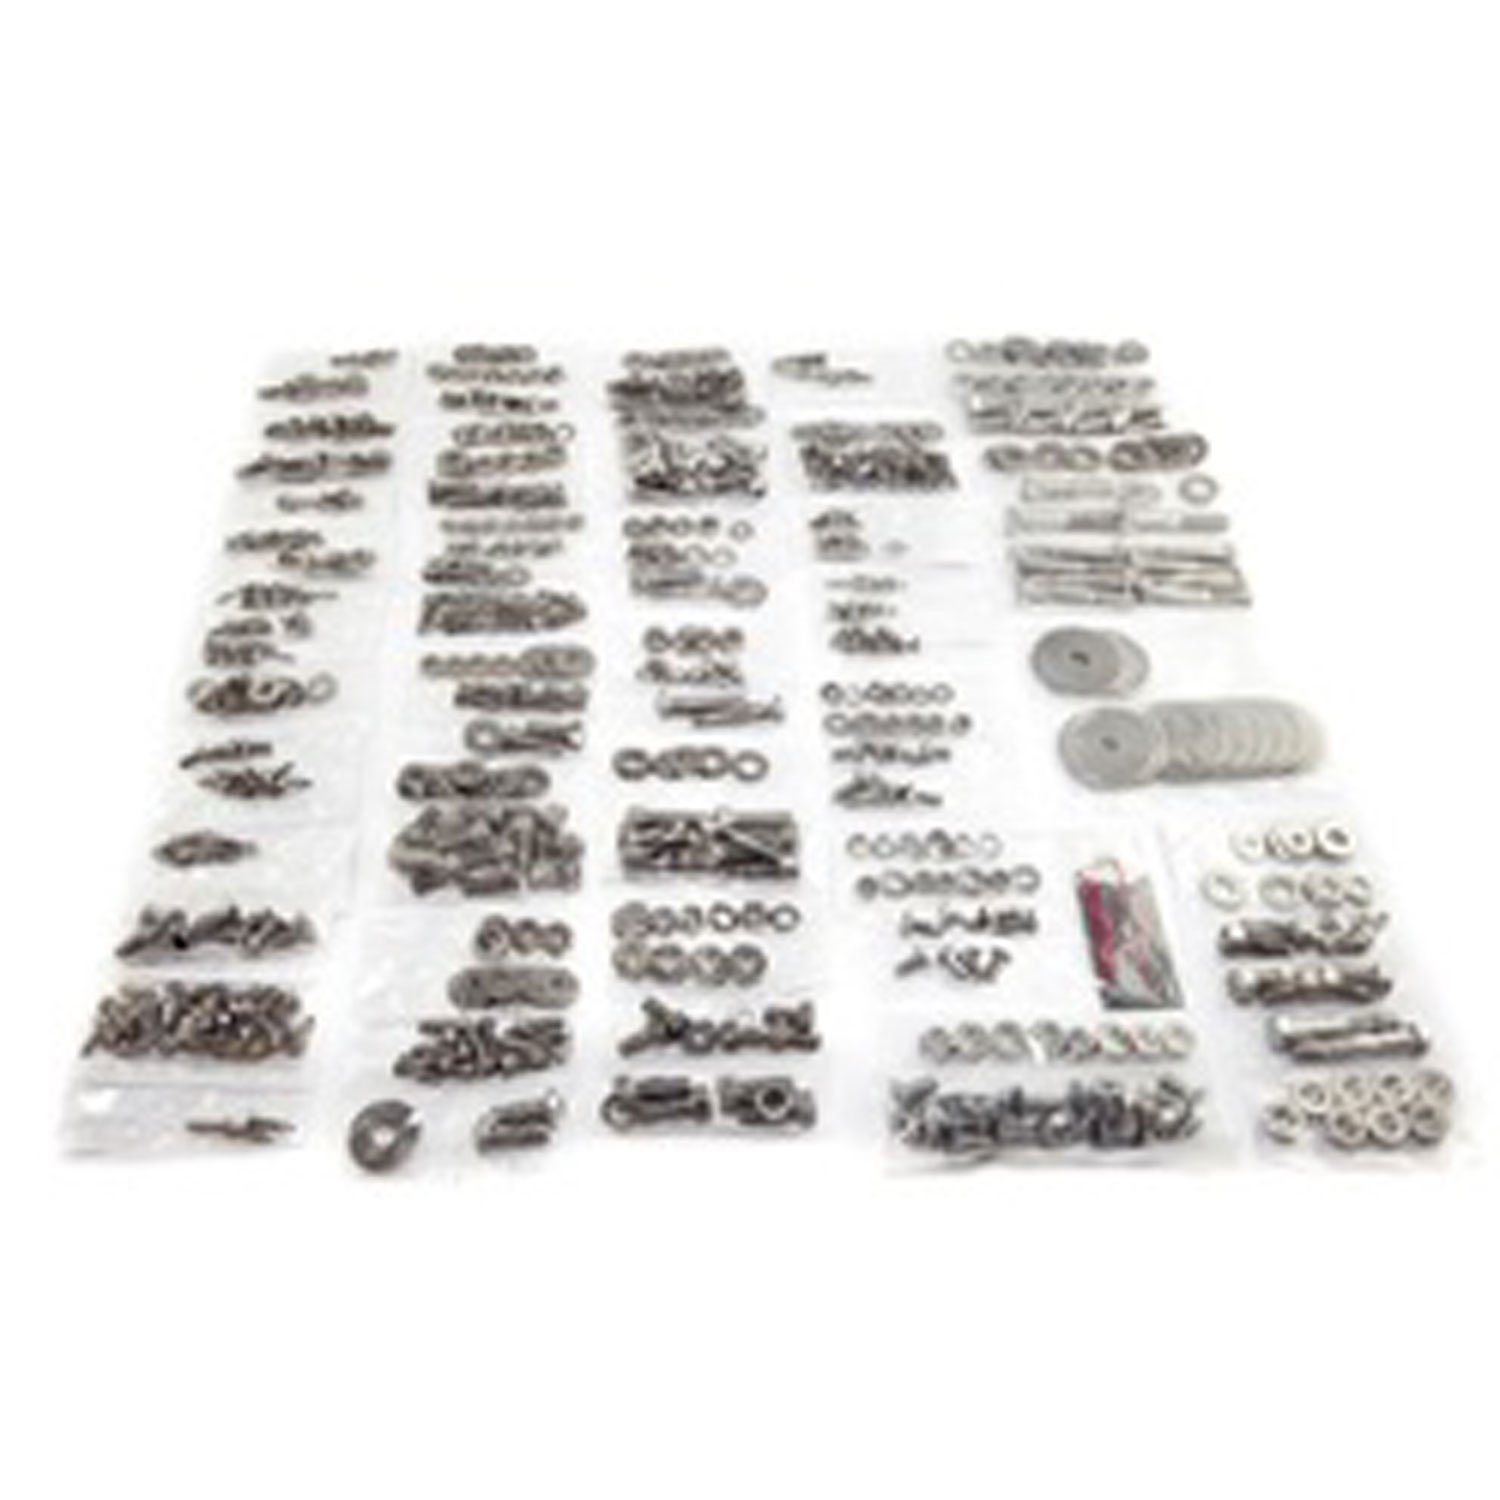 This 624 piece stainless steel body fastener kit from Omix-ADA gives you all the necessary fasteners